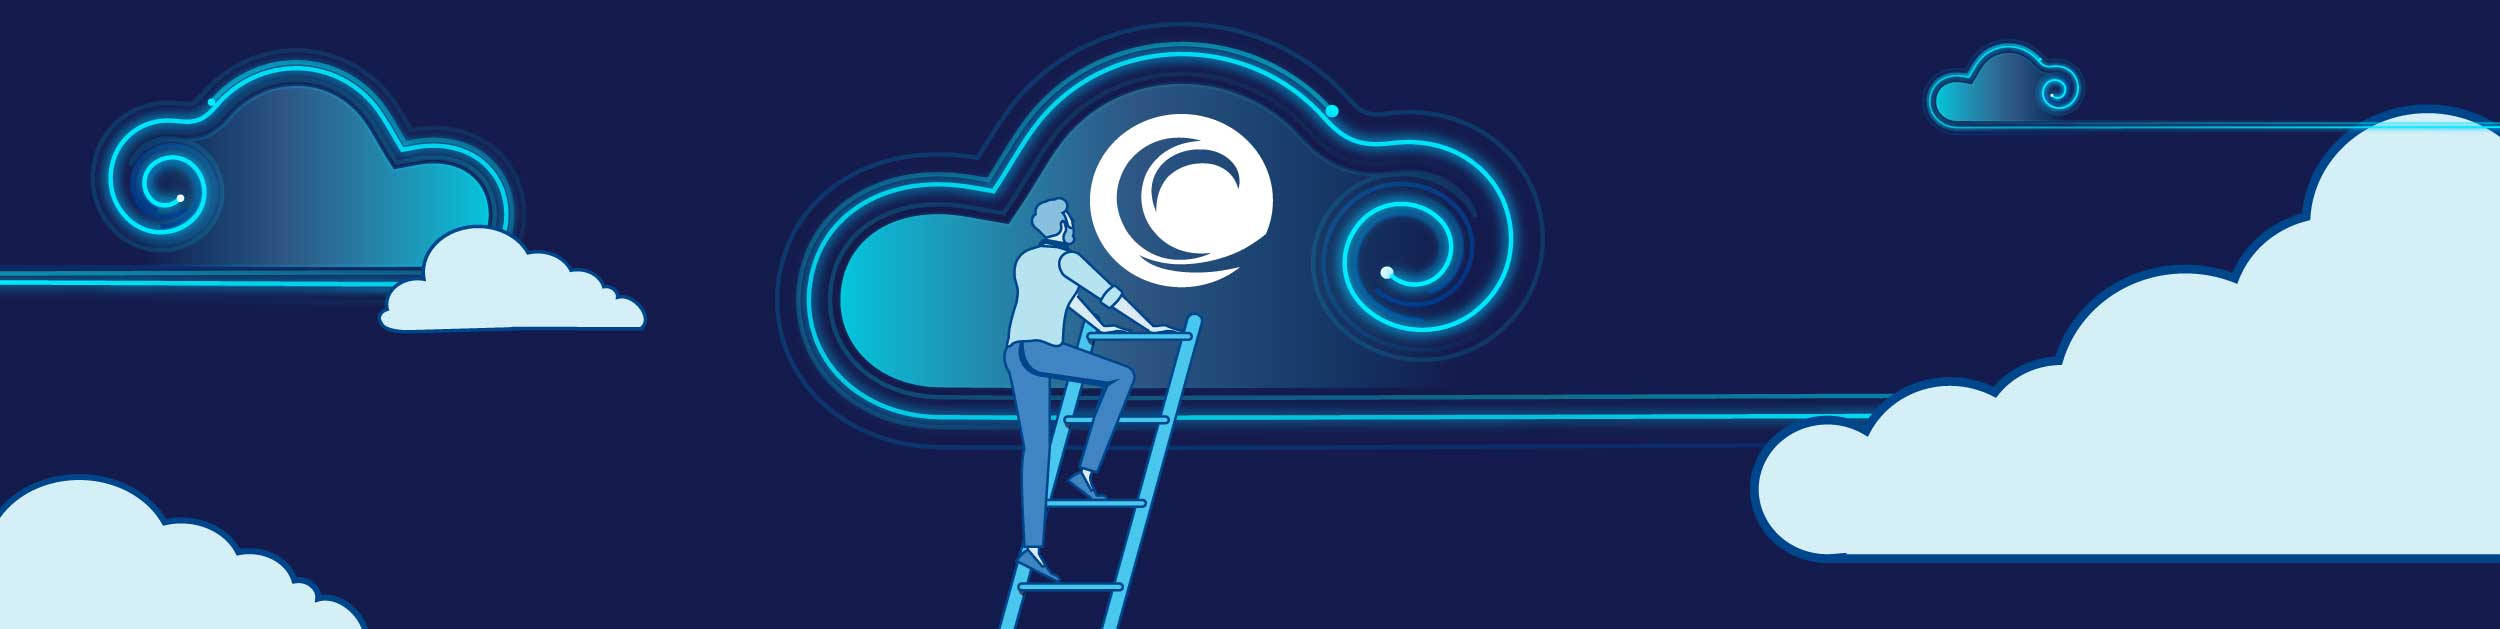 Illustration of BlueCrest employee climbing a ladder to the clouds